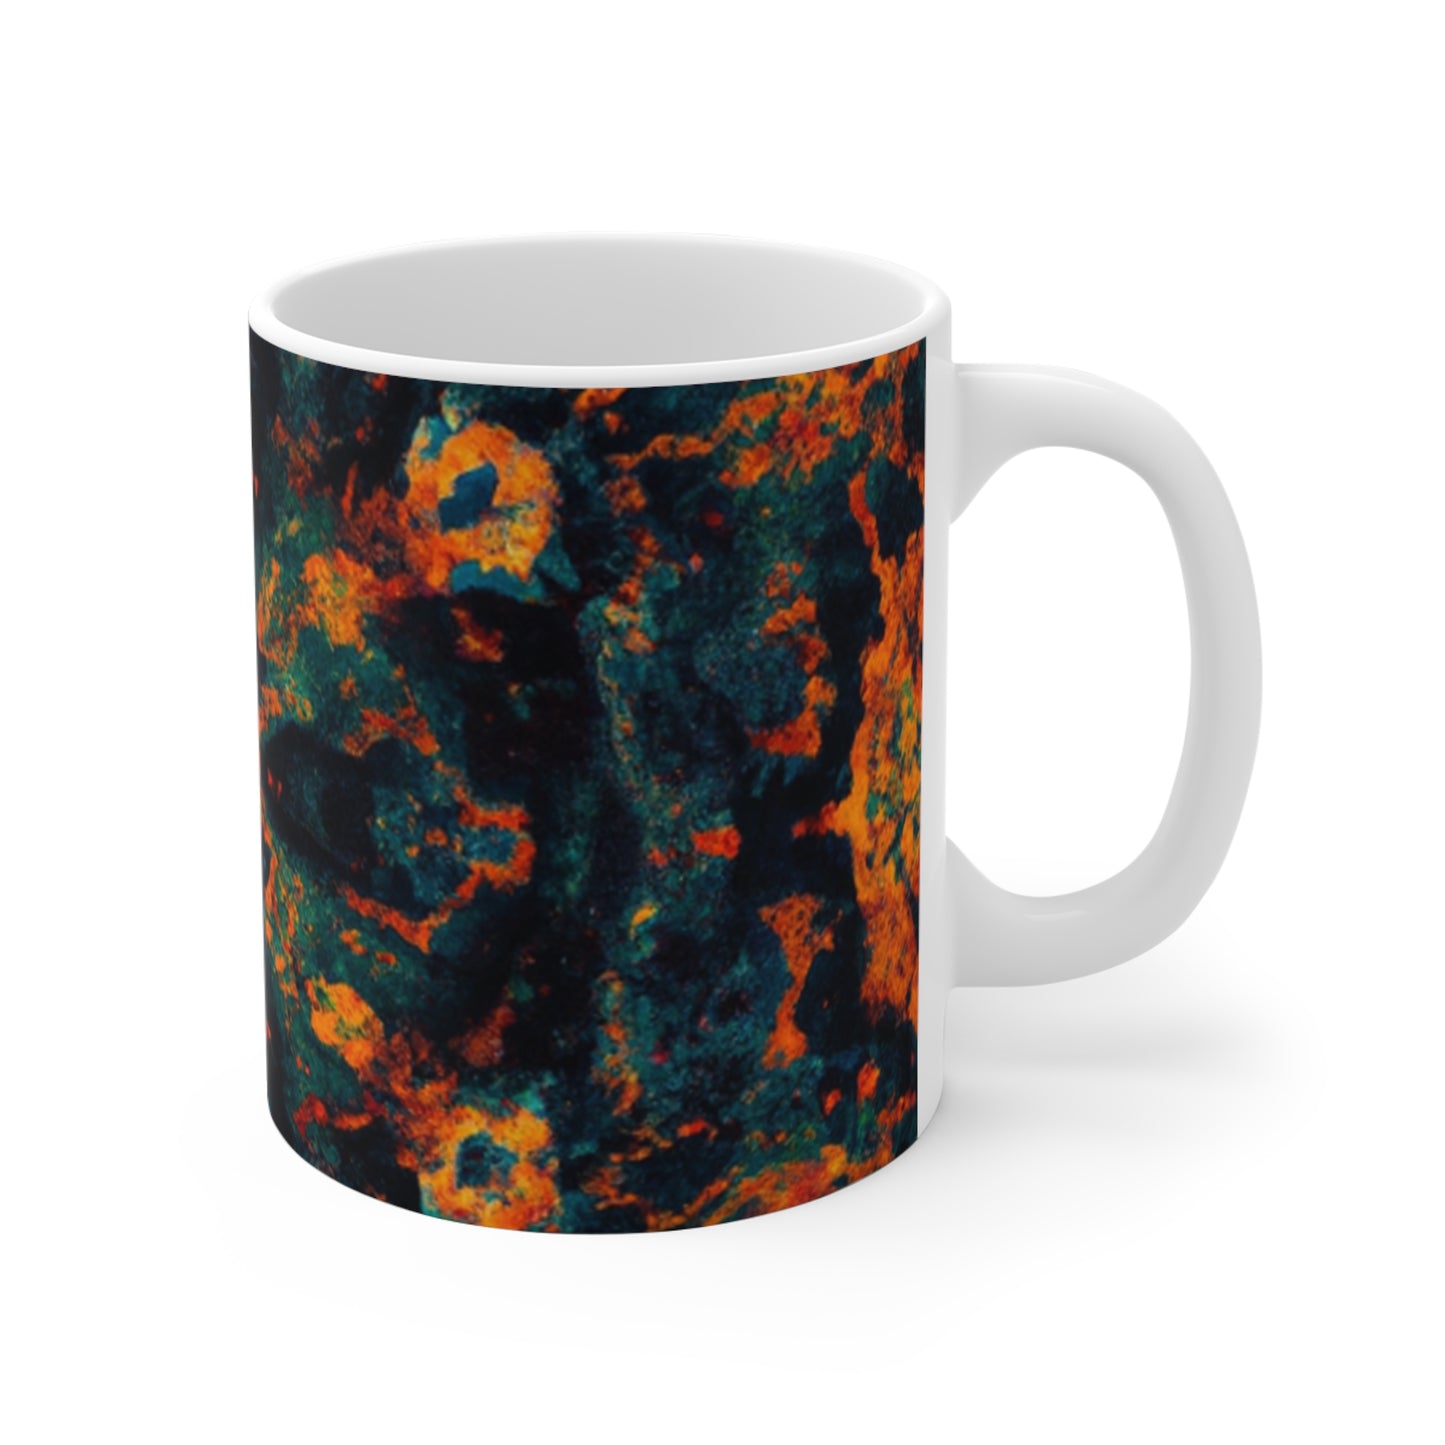 first name

Norman's Coffee - Psychedelic Coffee Cup Mug 11 Ounce